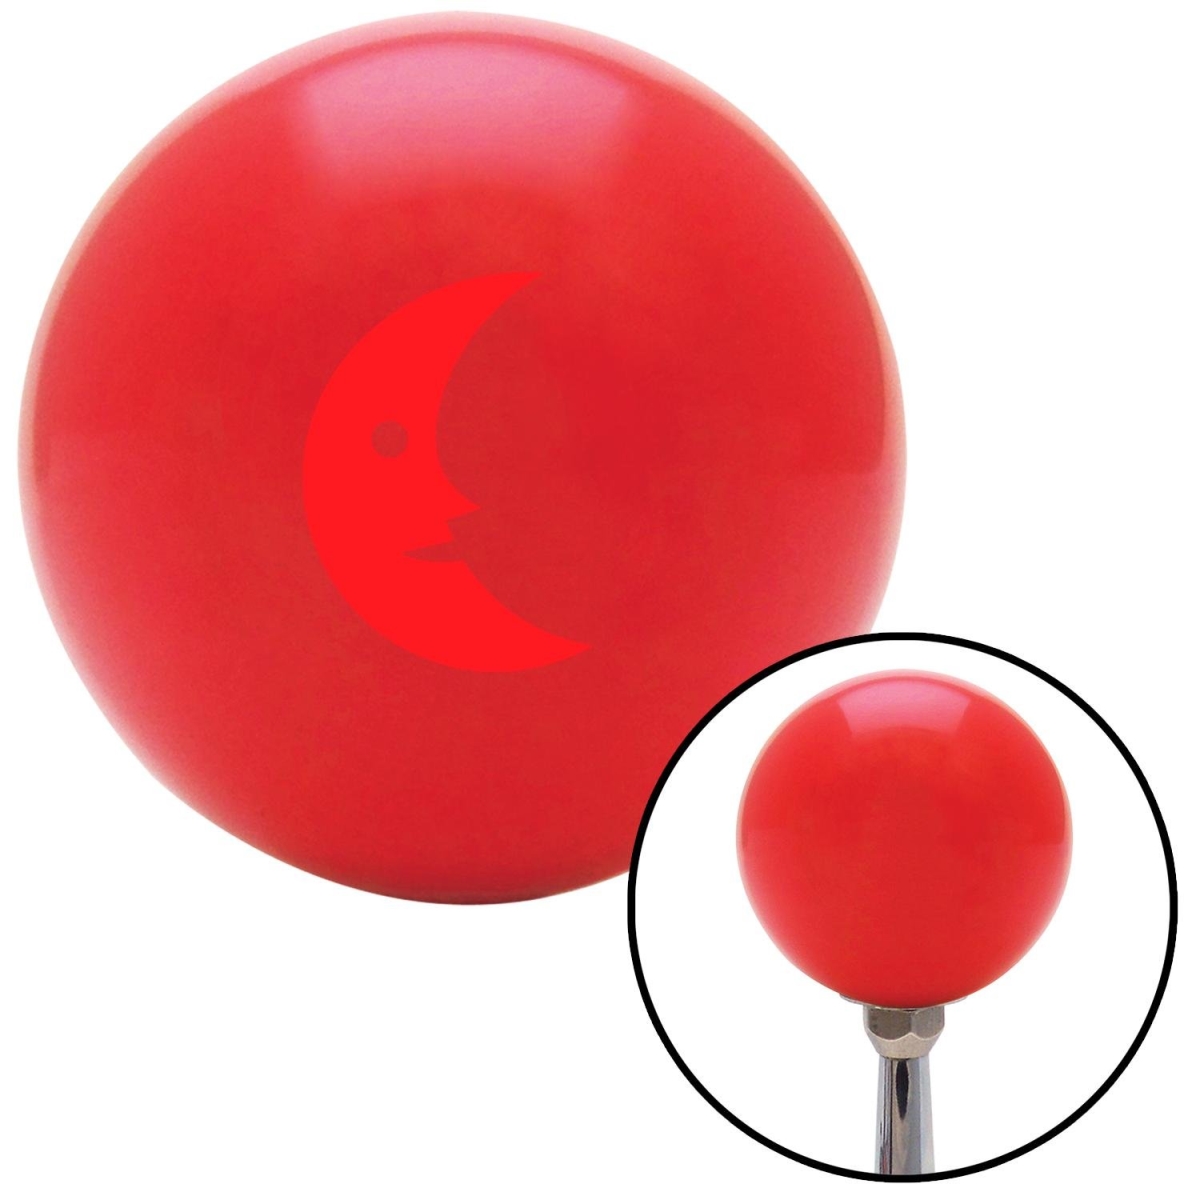 Picture of American Shifter 101373 Red Crescent Moon Smiling Red Shift Knob with M16 x 1.5 Insert Shifter Auto Manual